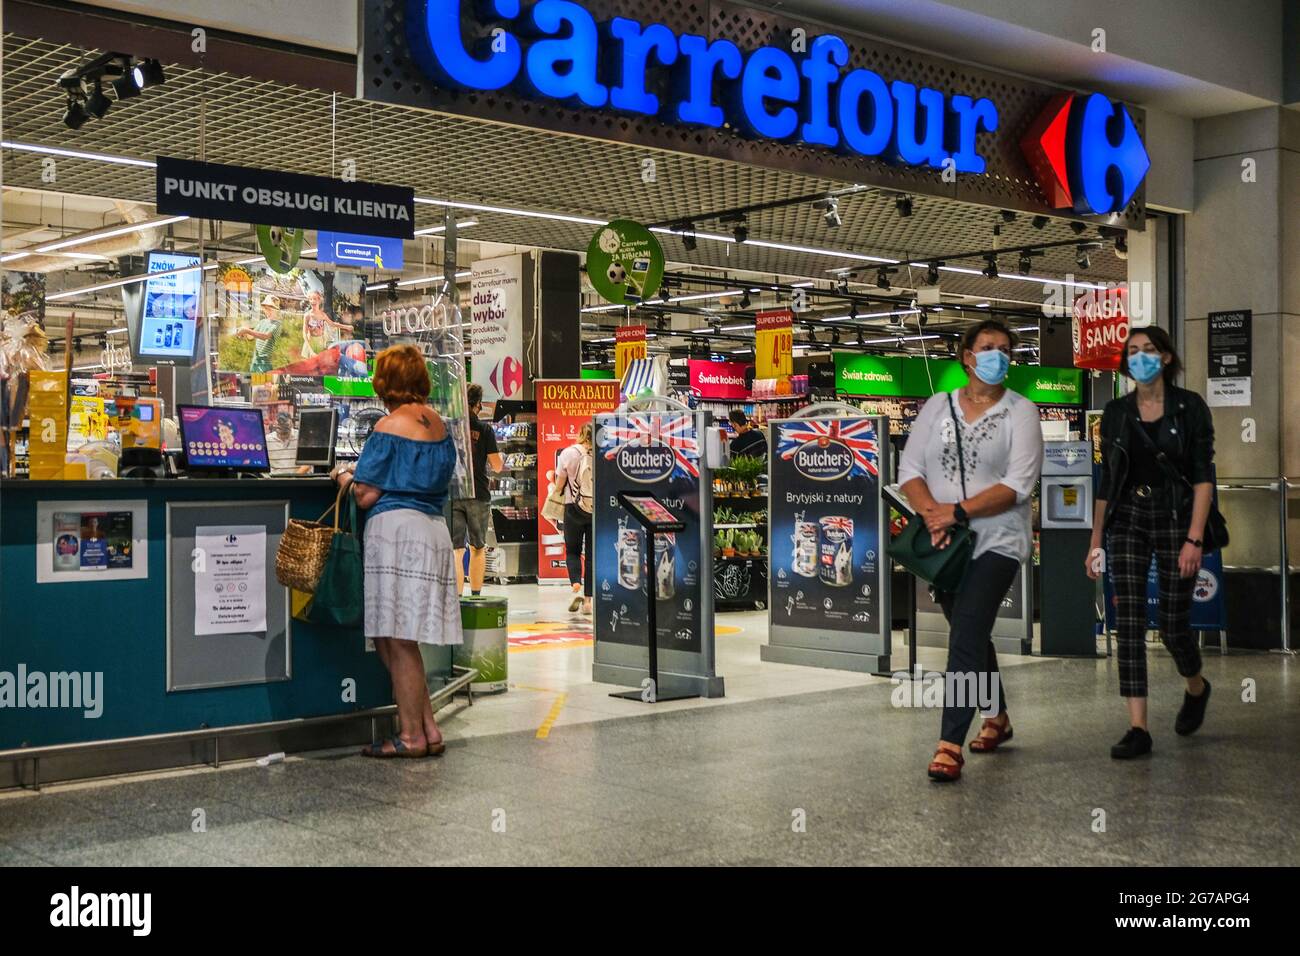 Krakow, Poland. 12th July, 2021. People walk past a Carrefour shop inside a  shopping mall. Credit: Omar Marques/SOPA Images/ZUMA Wire/Alamy Live News  Stock Photo - Alamy